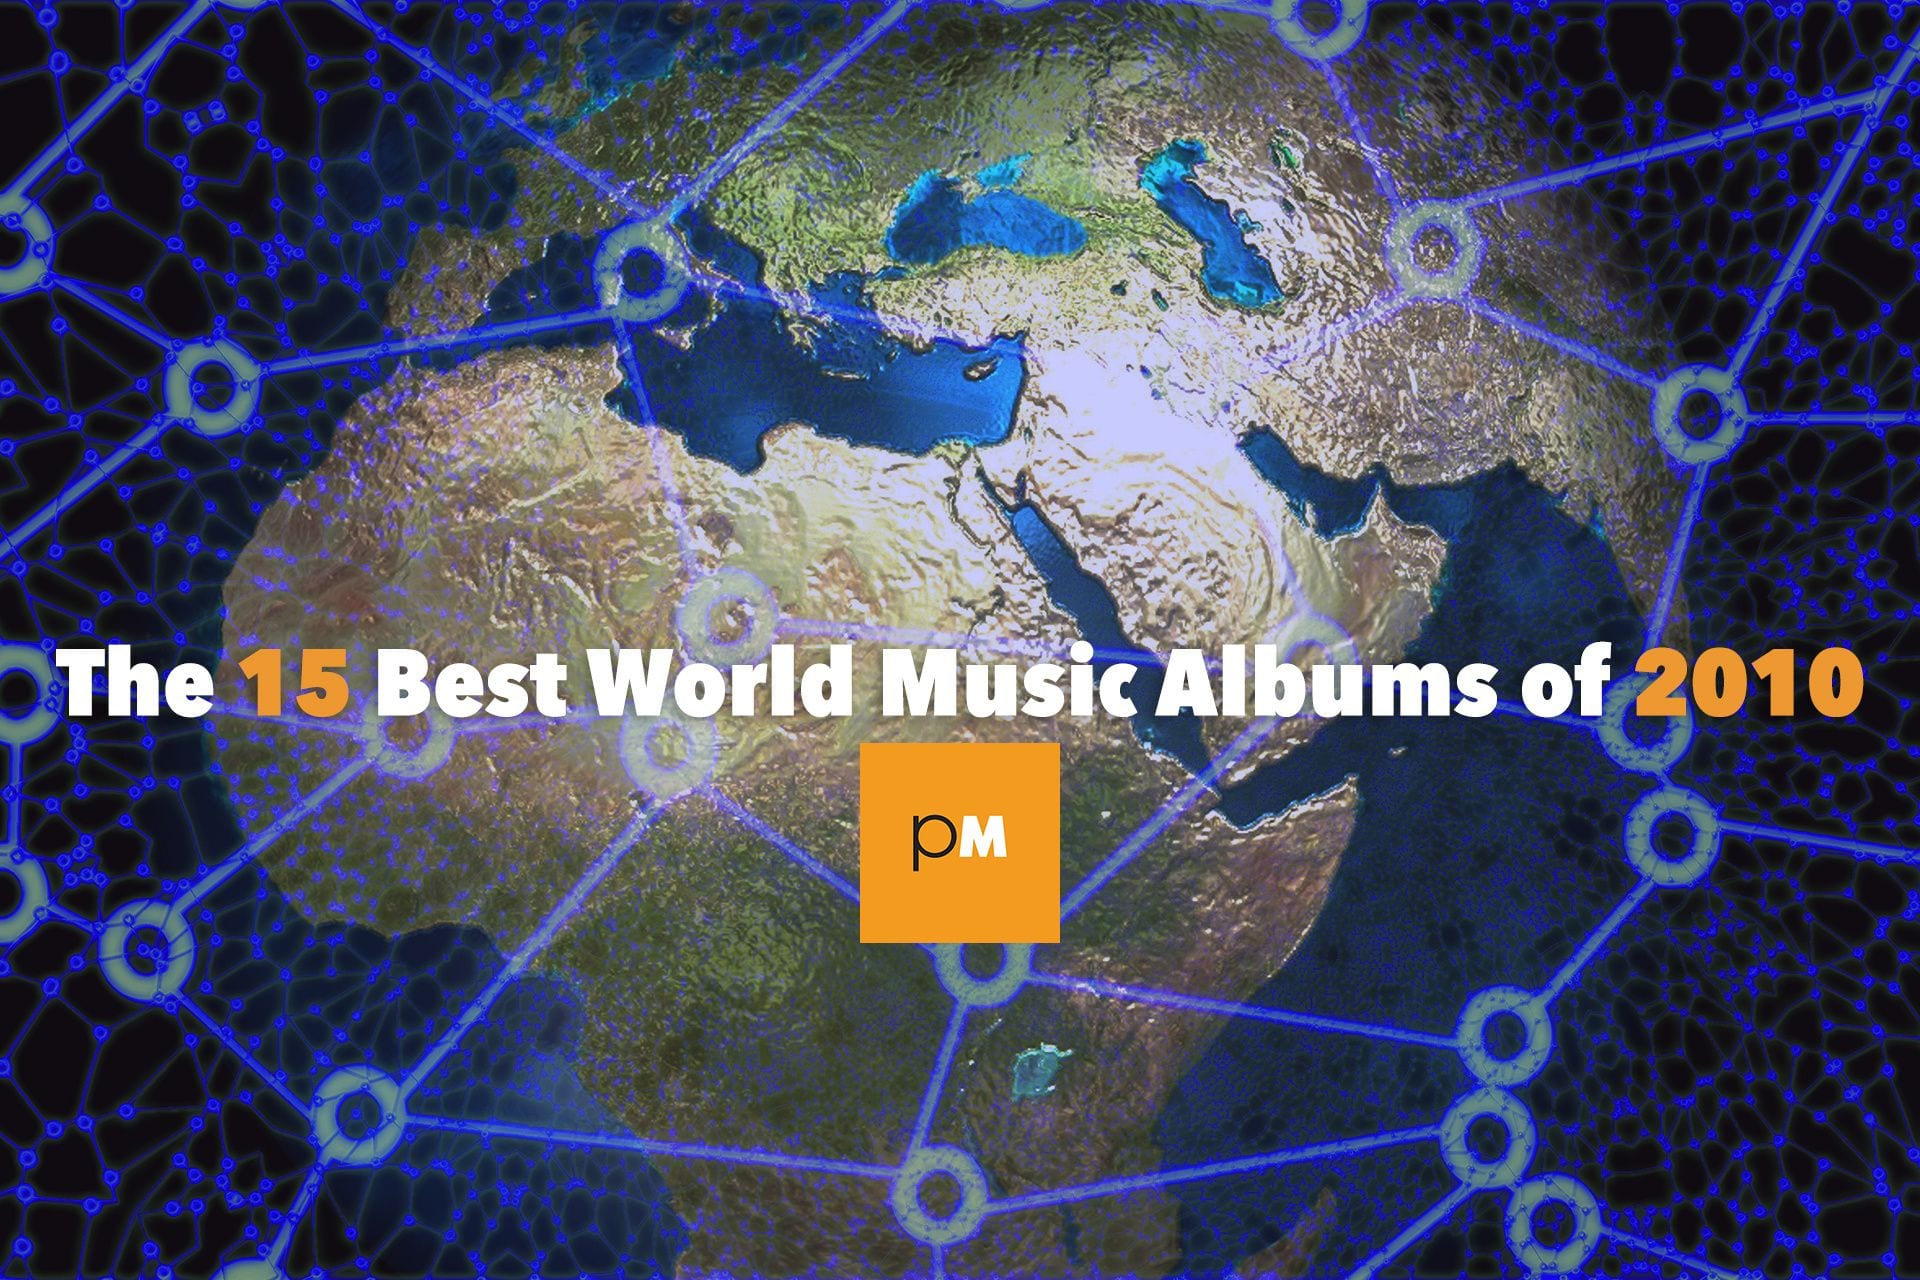 The 15 Best World Music Albums of 2010